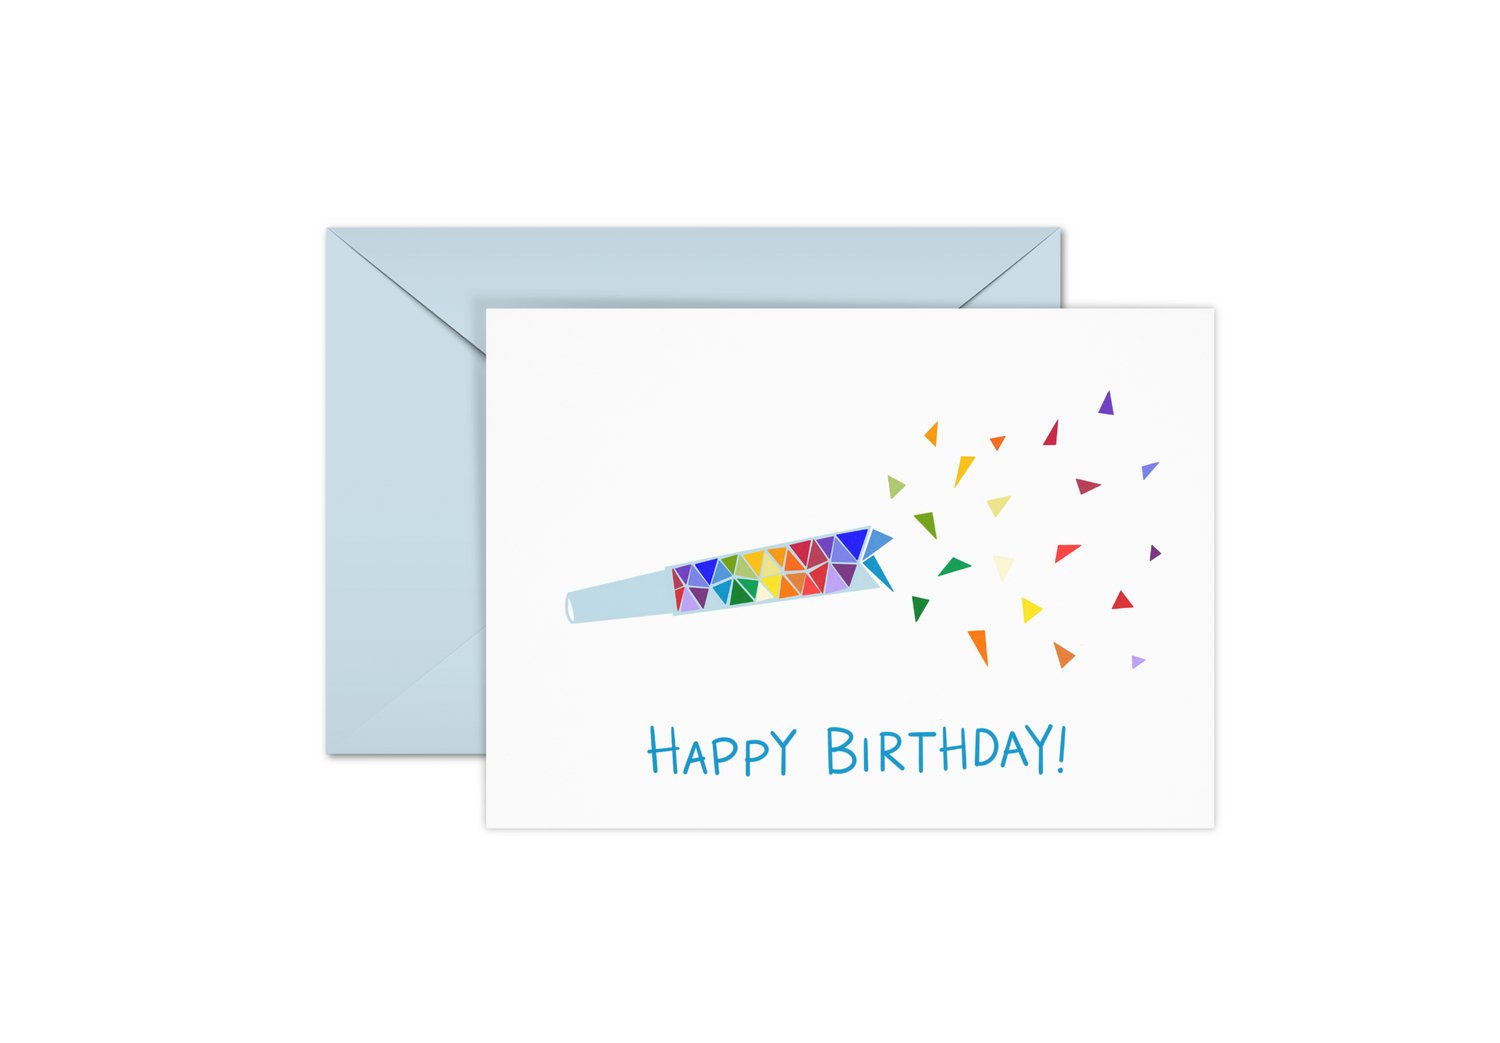 Birthday card with rainbow noisemaker and blue text that reads, "Happy Birthday!"